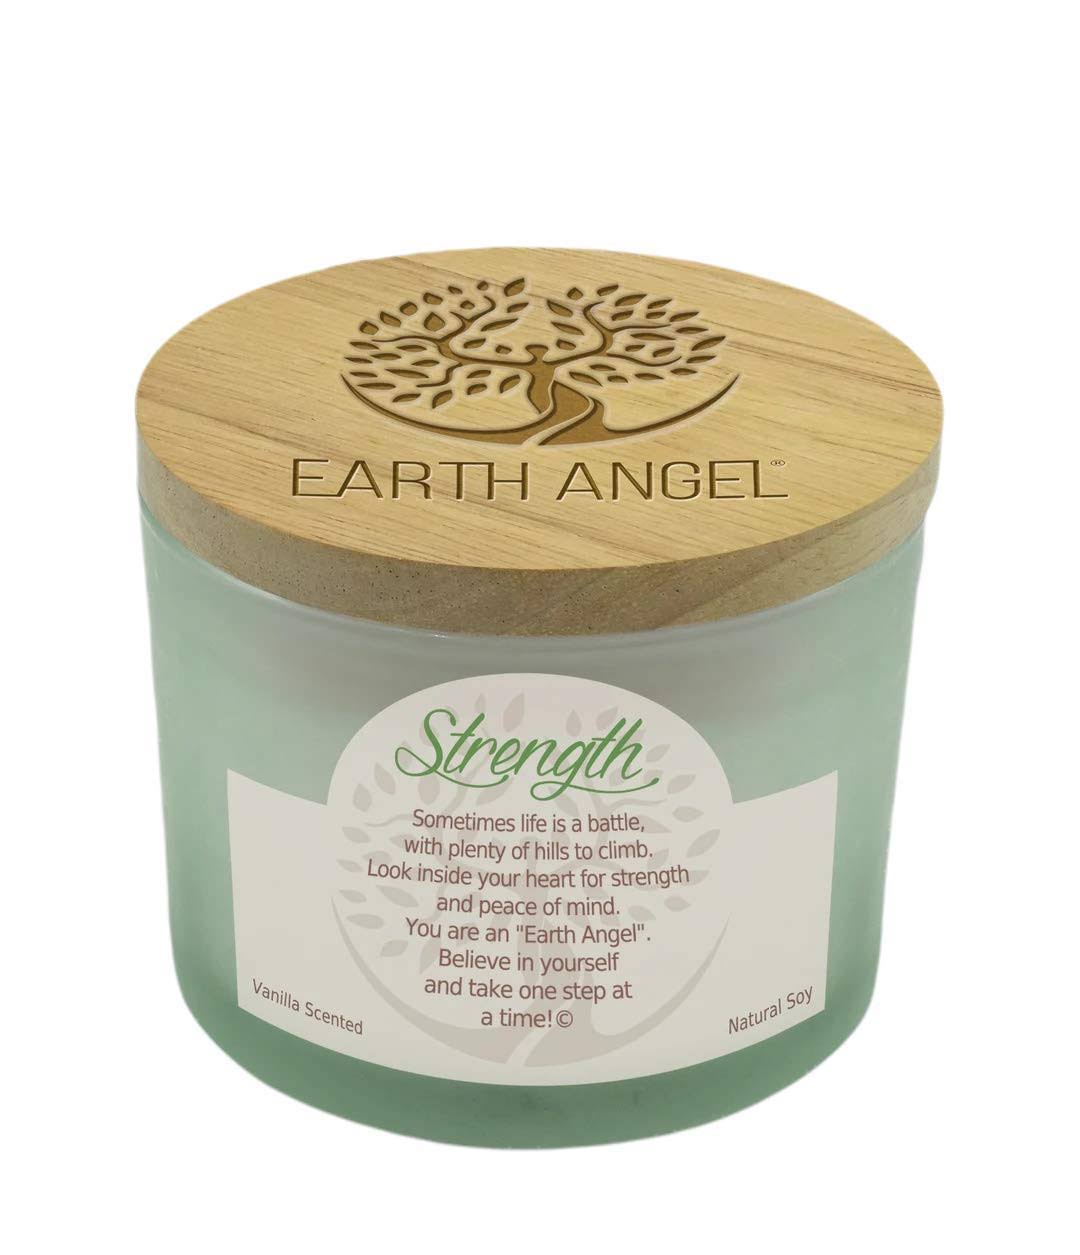 Earth Angel Natural Soy Candle 12 Ounce (strength)